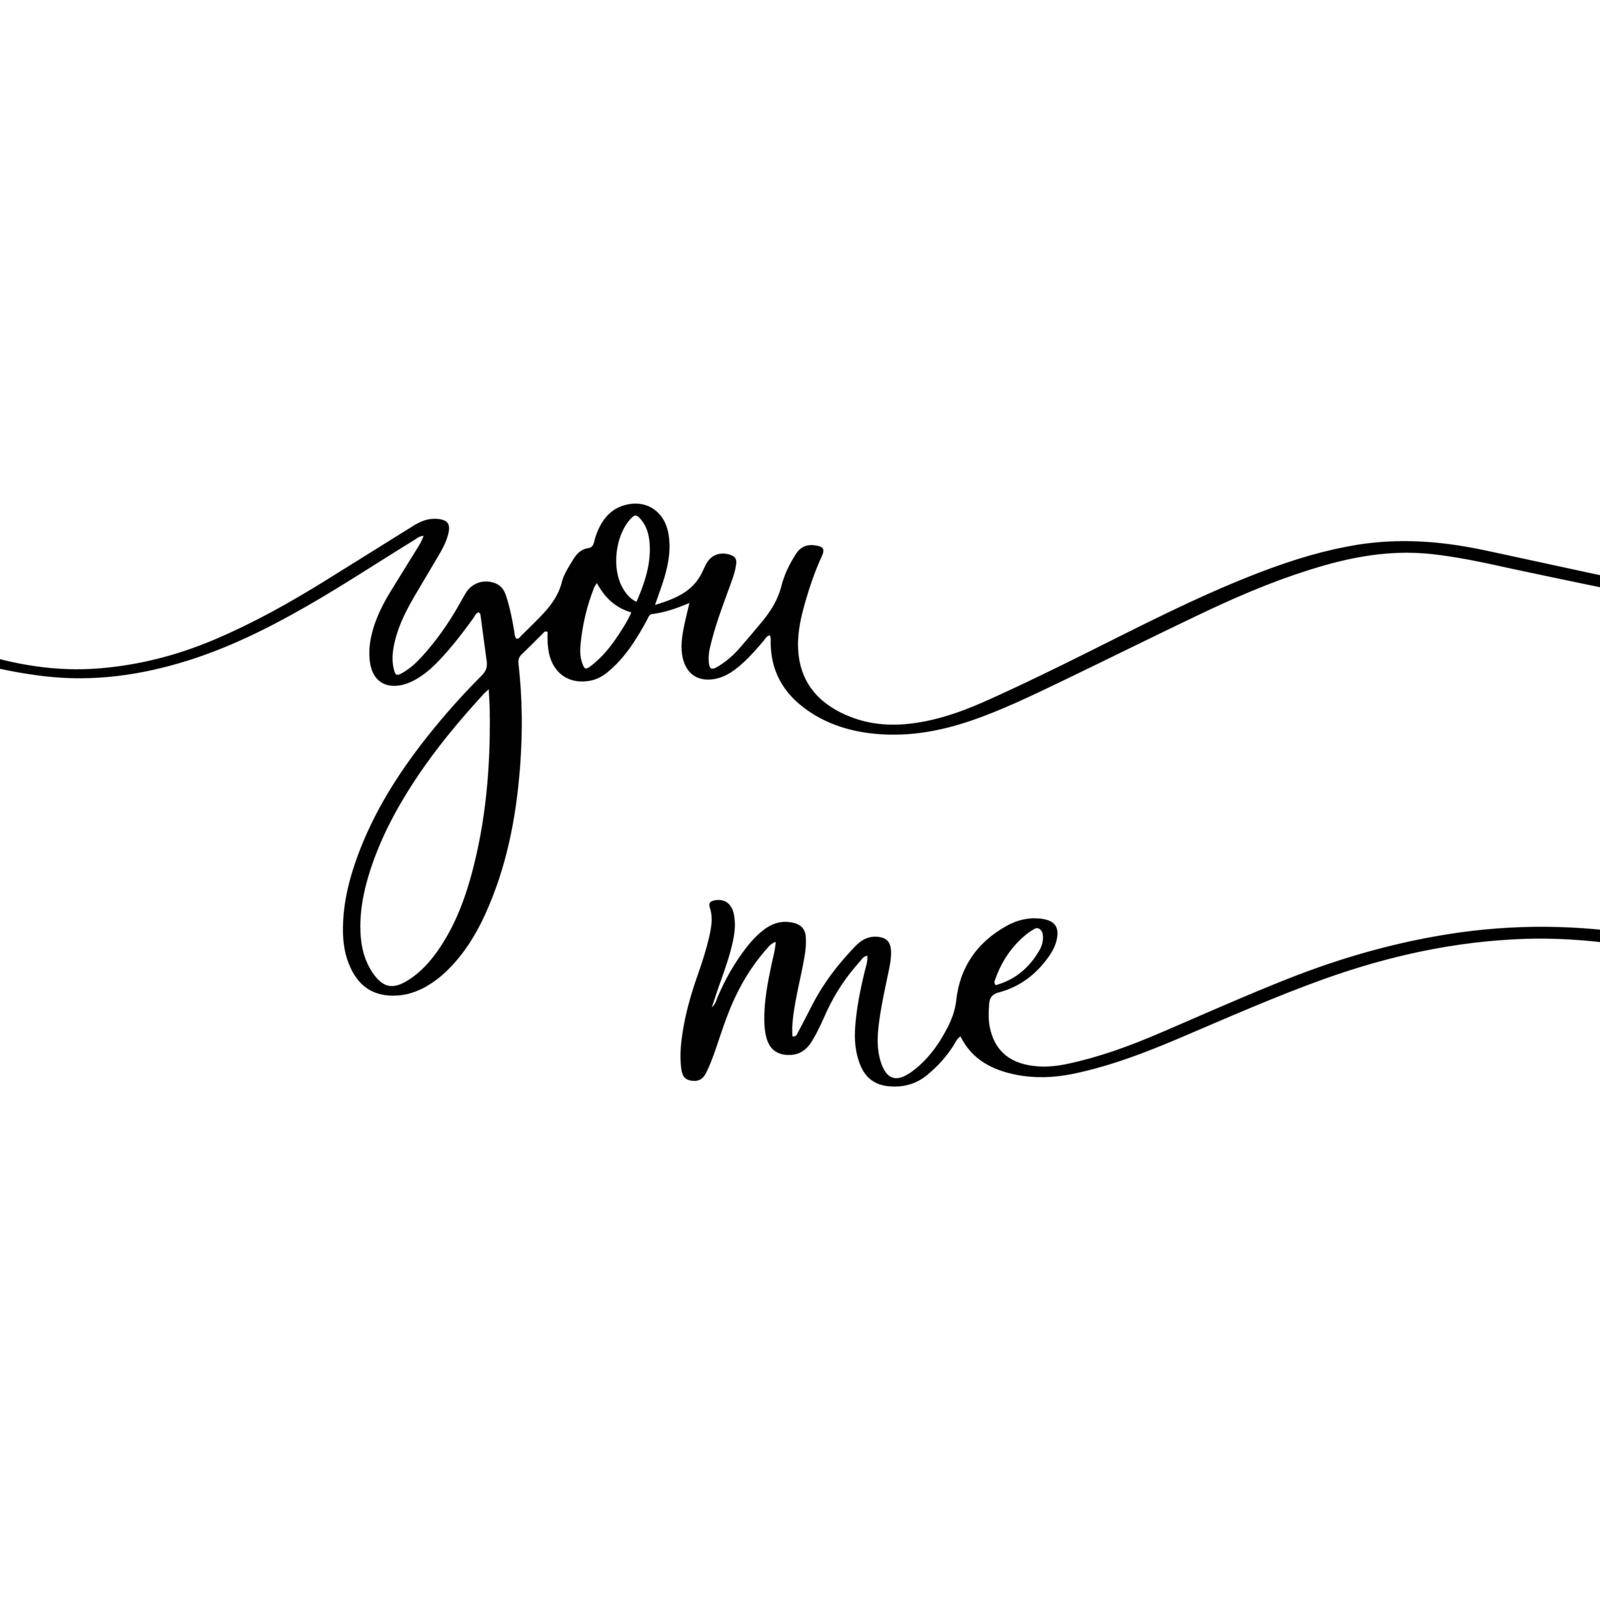 You and me delicate elegant hand lettering